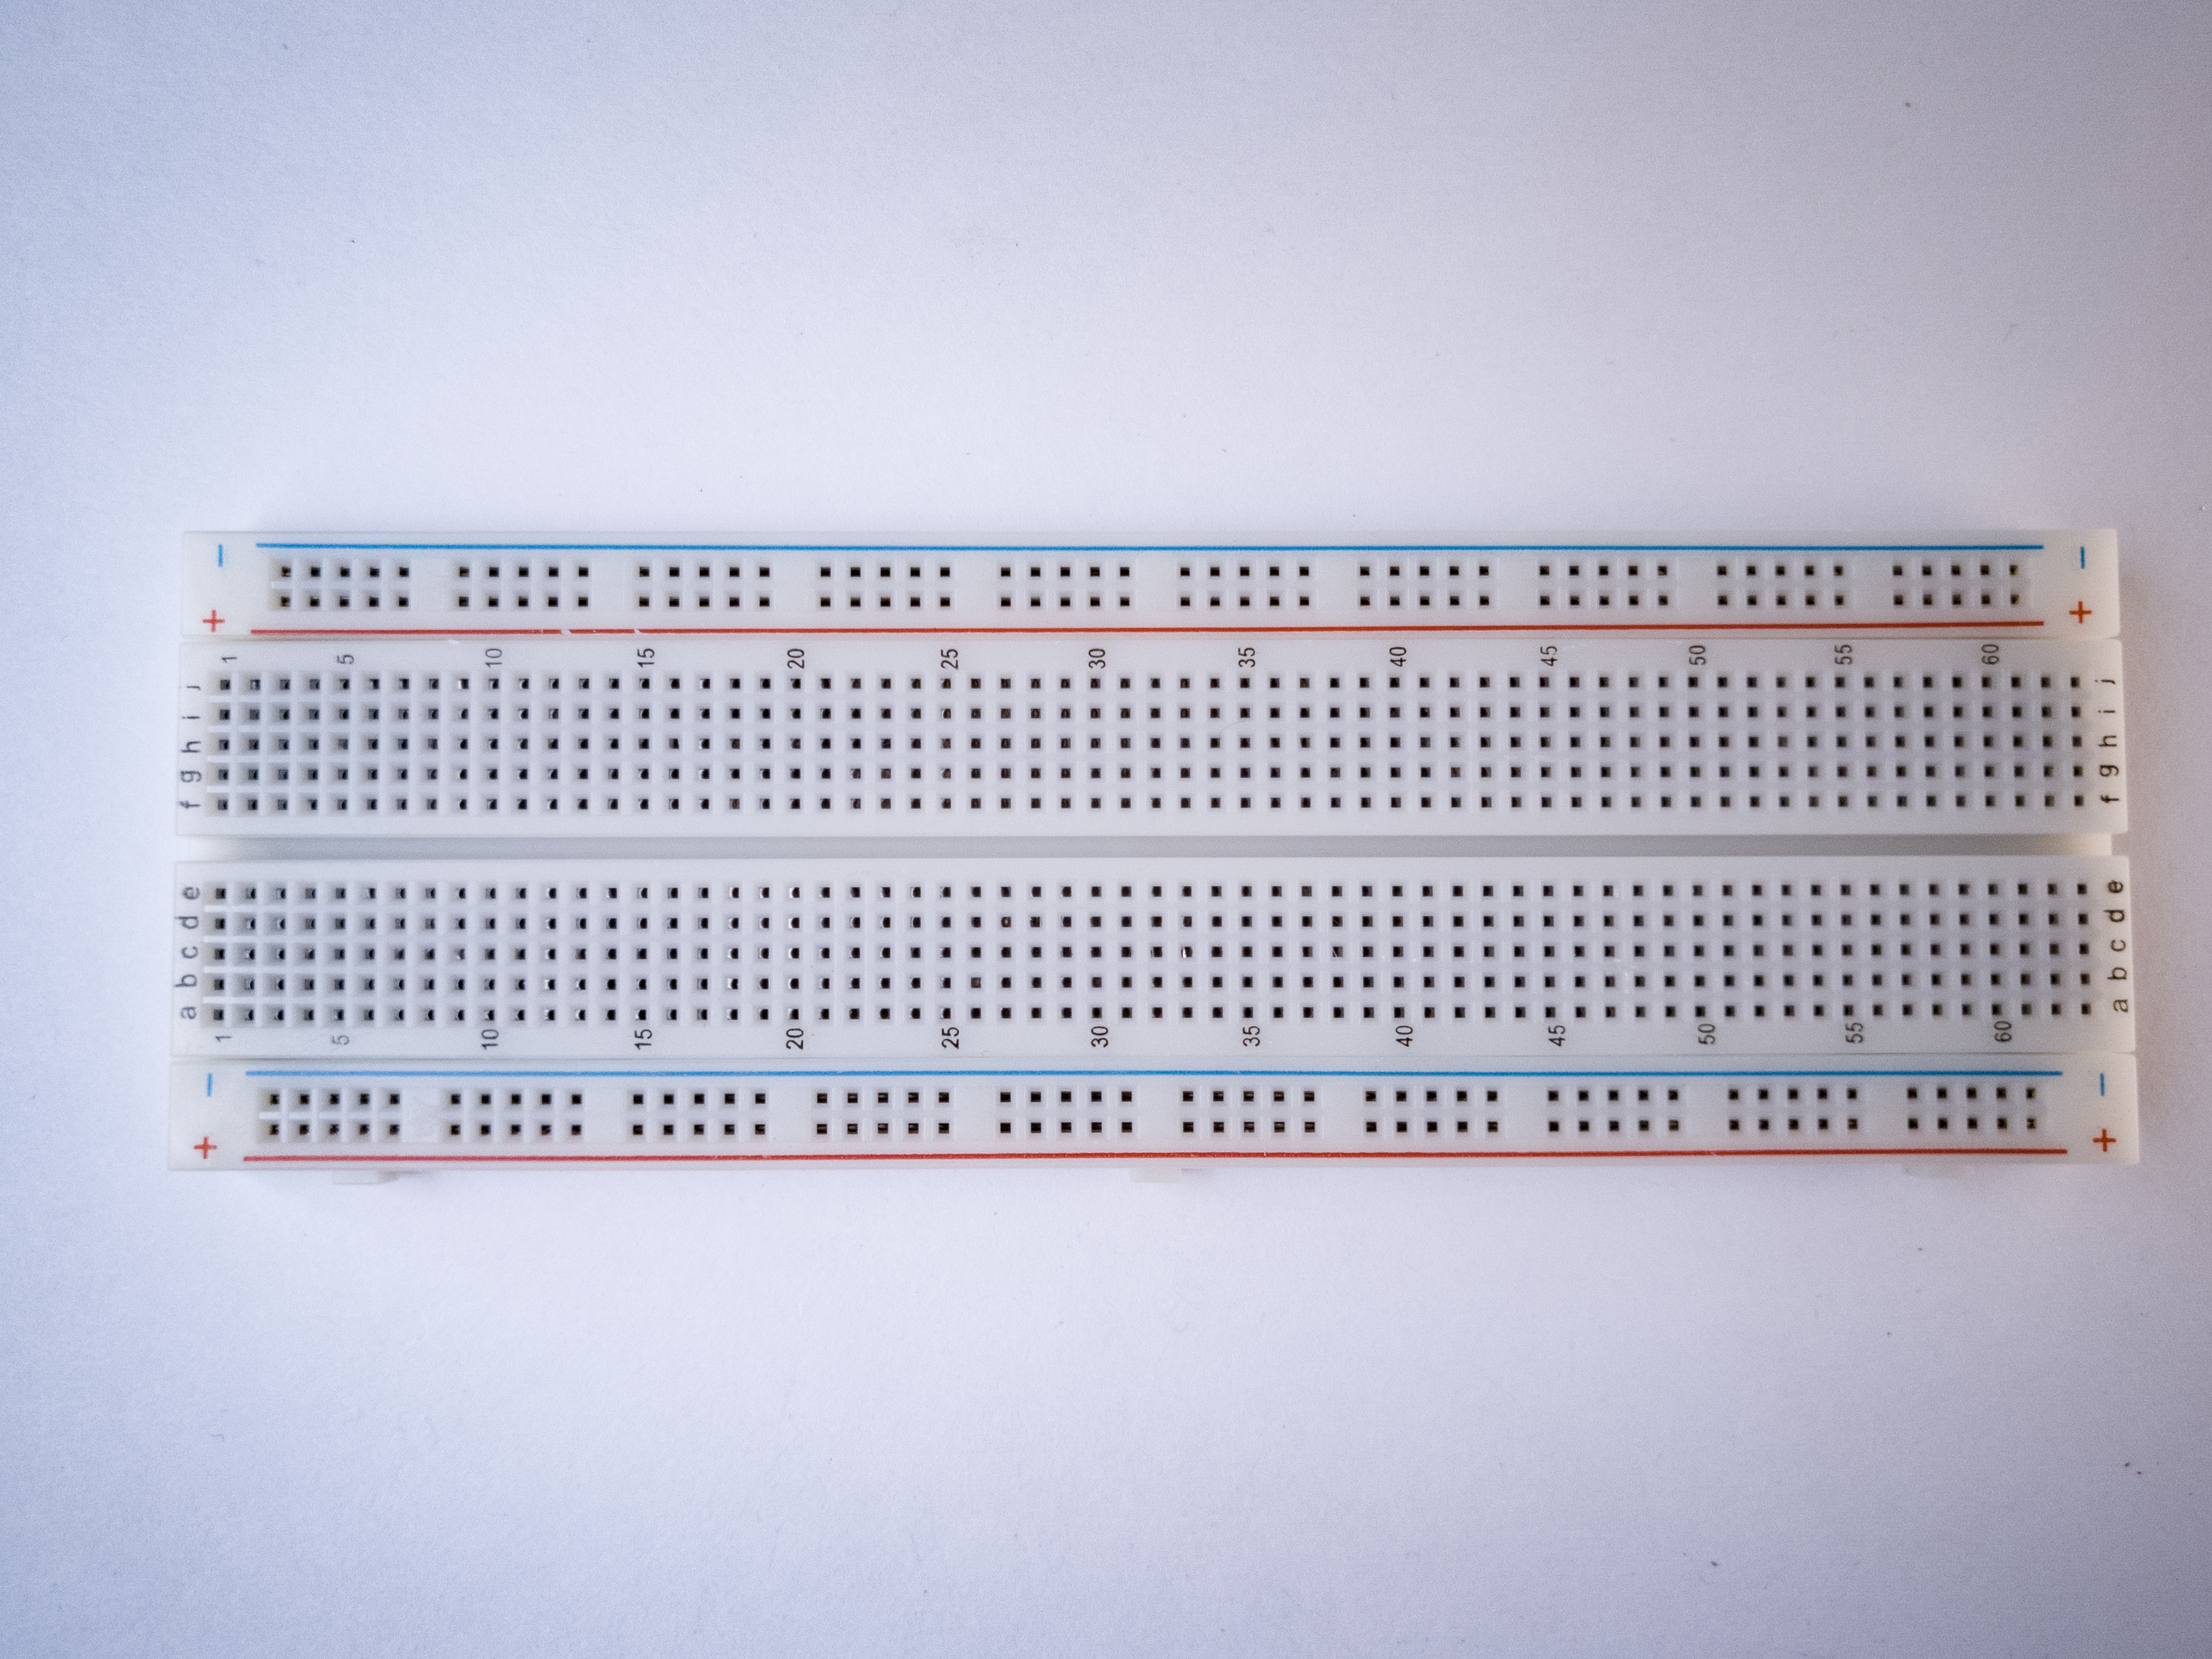 Photo of a solderless breadboard. The . board is turned sideways so that the side rows are on top and bottom in this view. There are no components mounted on the board.